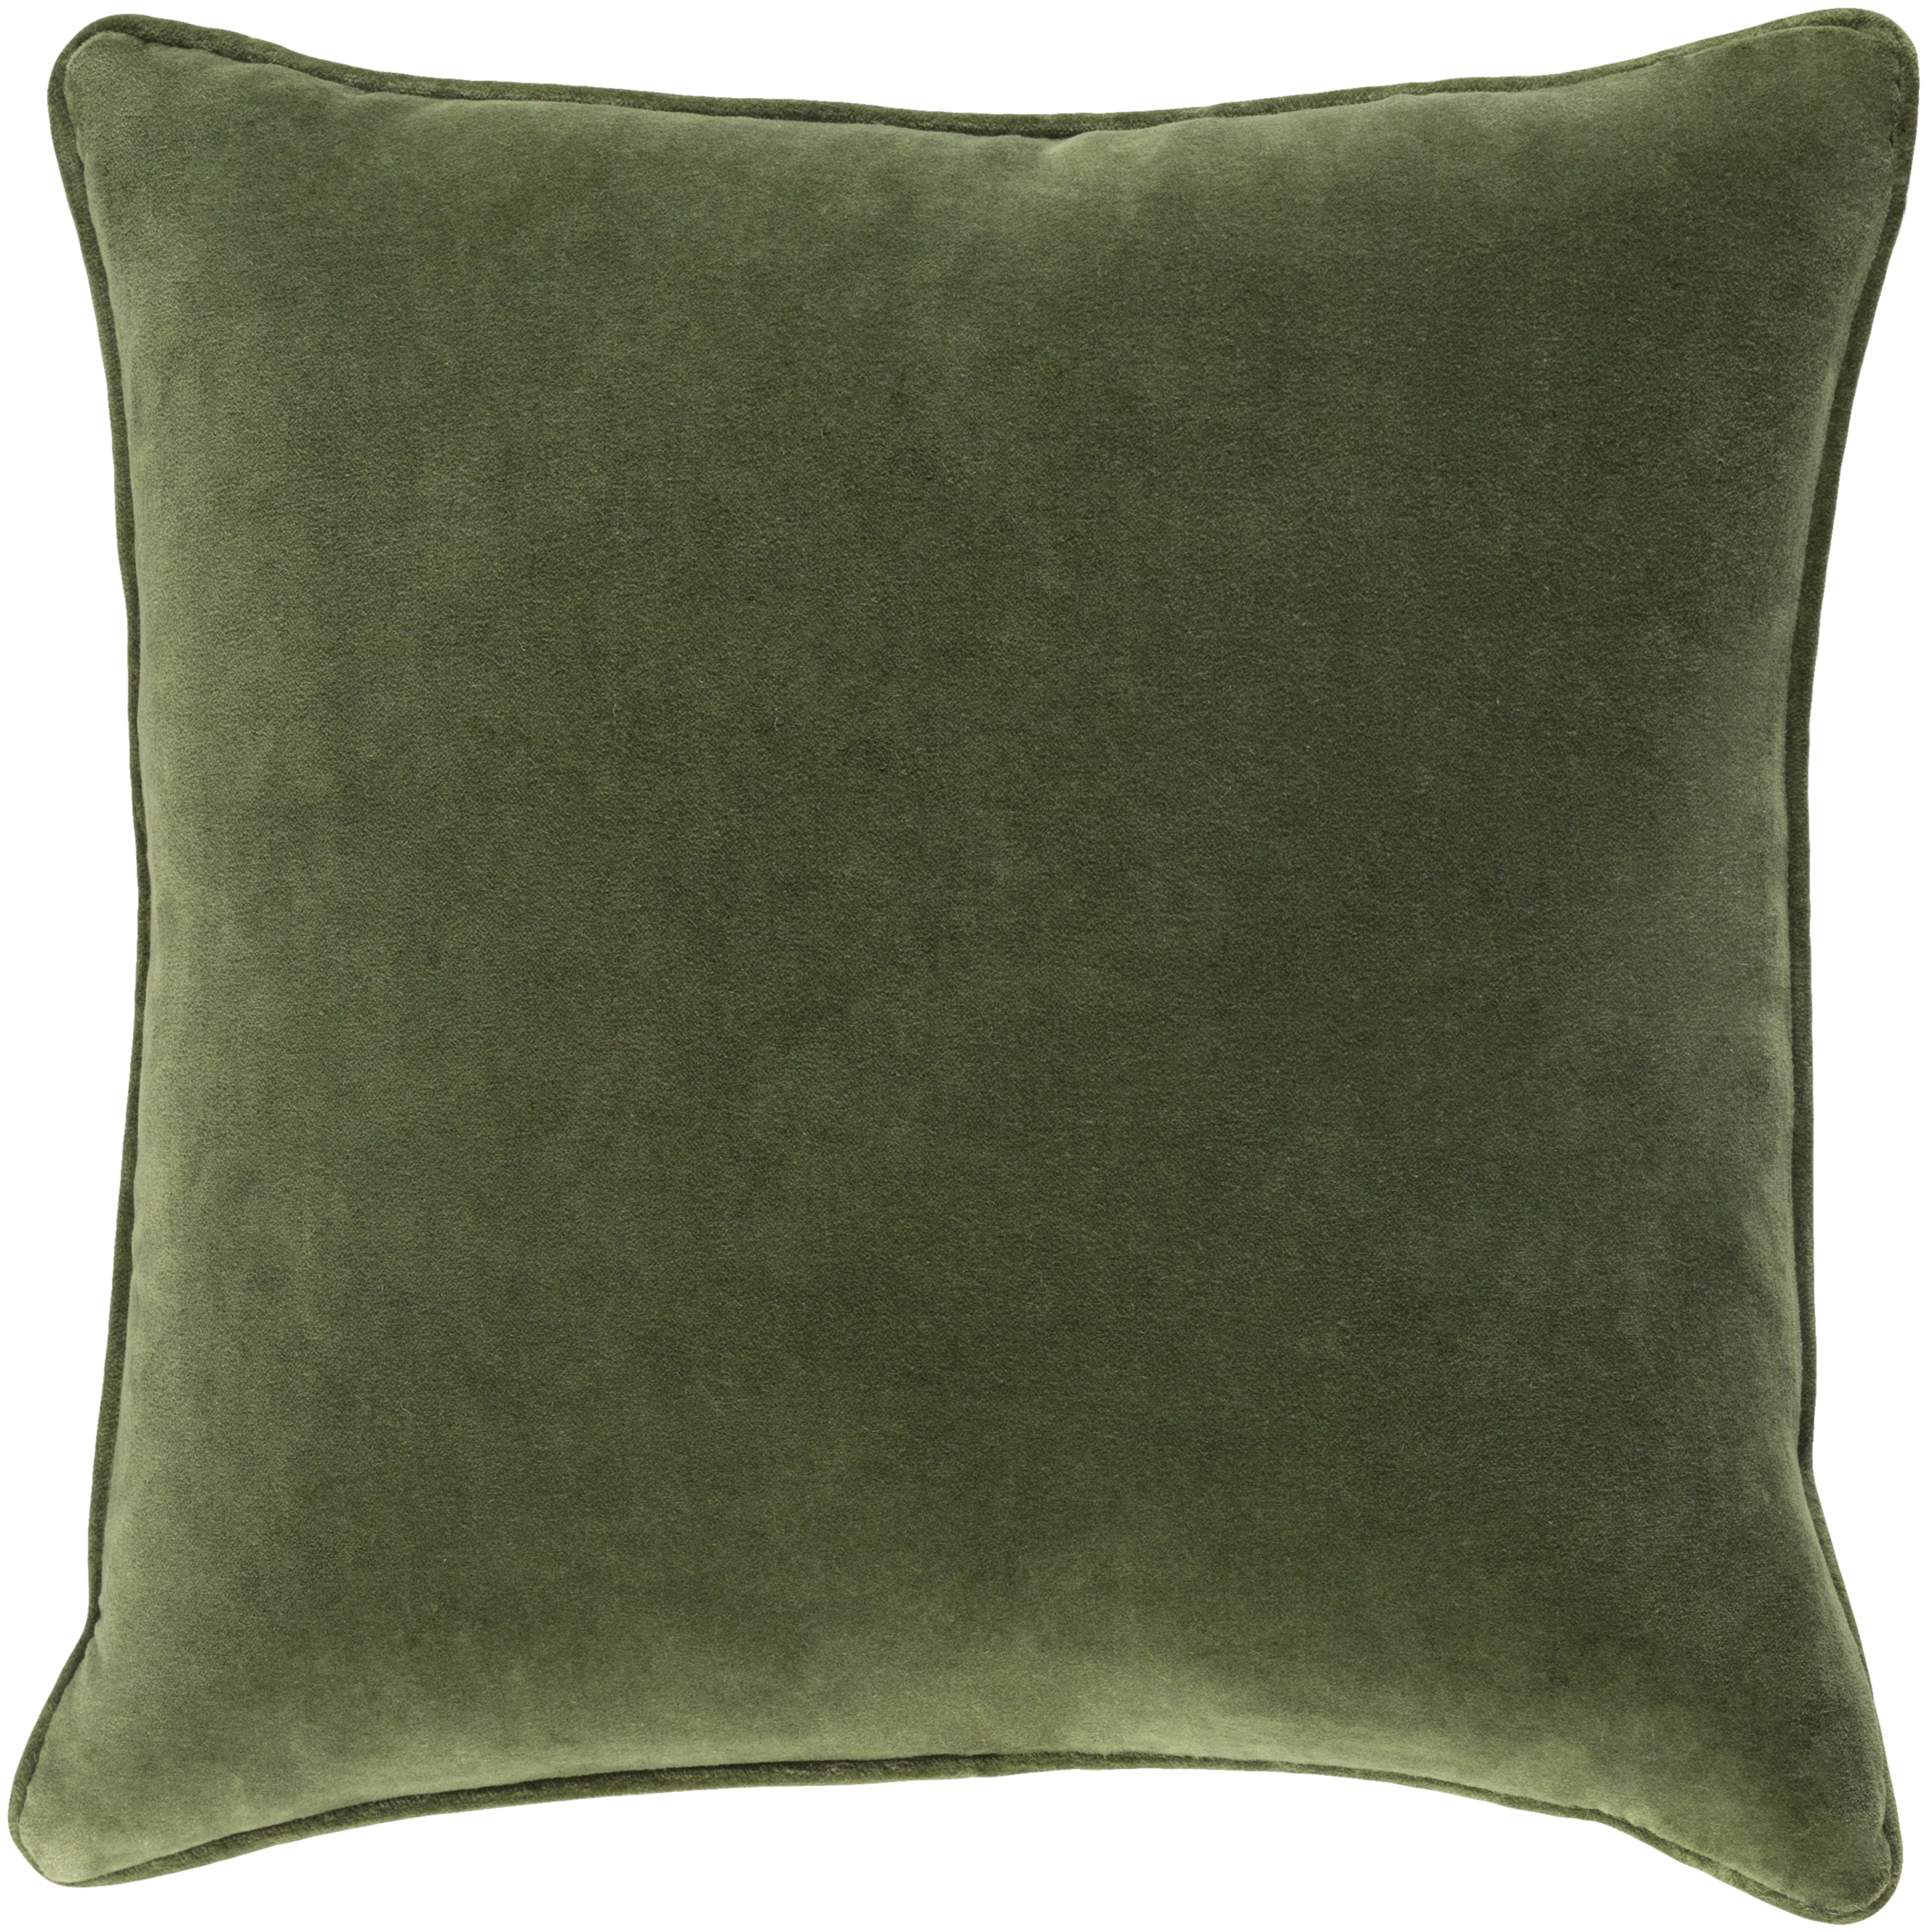 Safflower Throw Pillow, 20" x 20", with down insert - Image 0